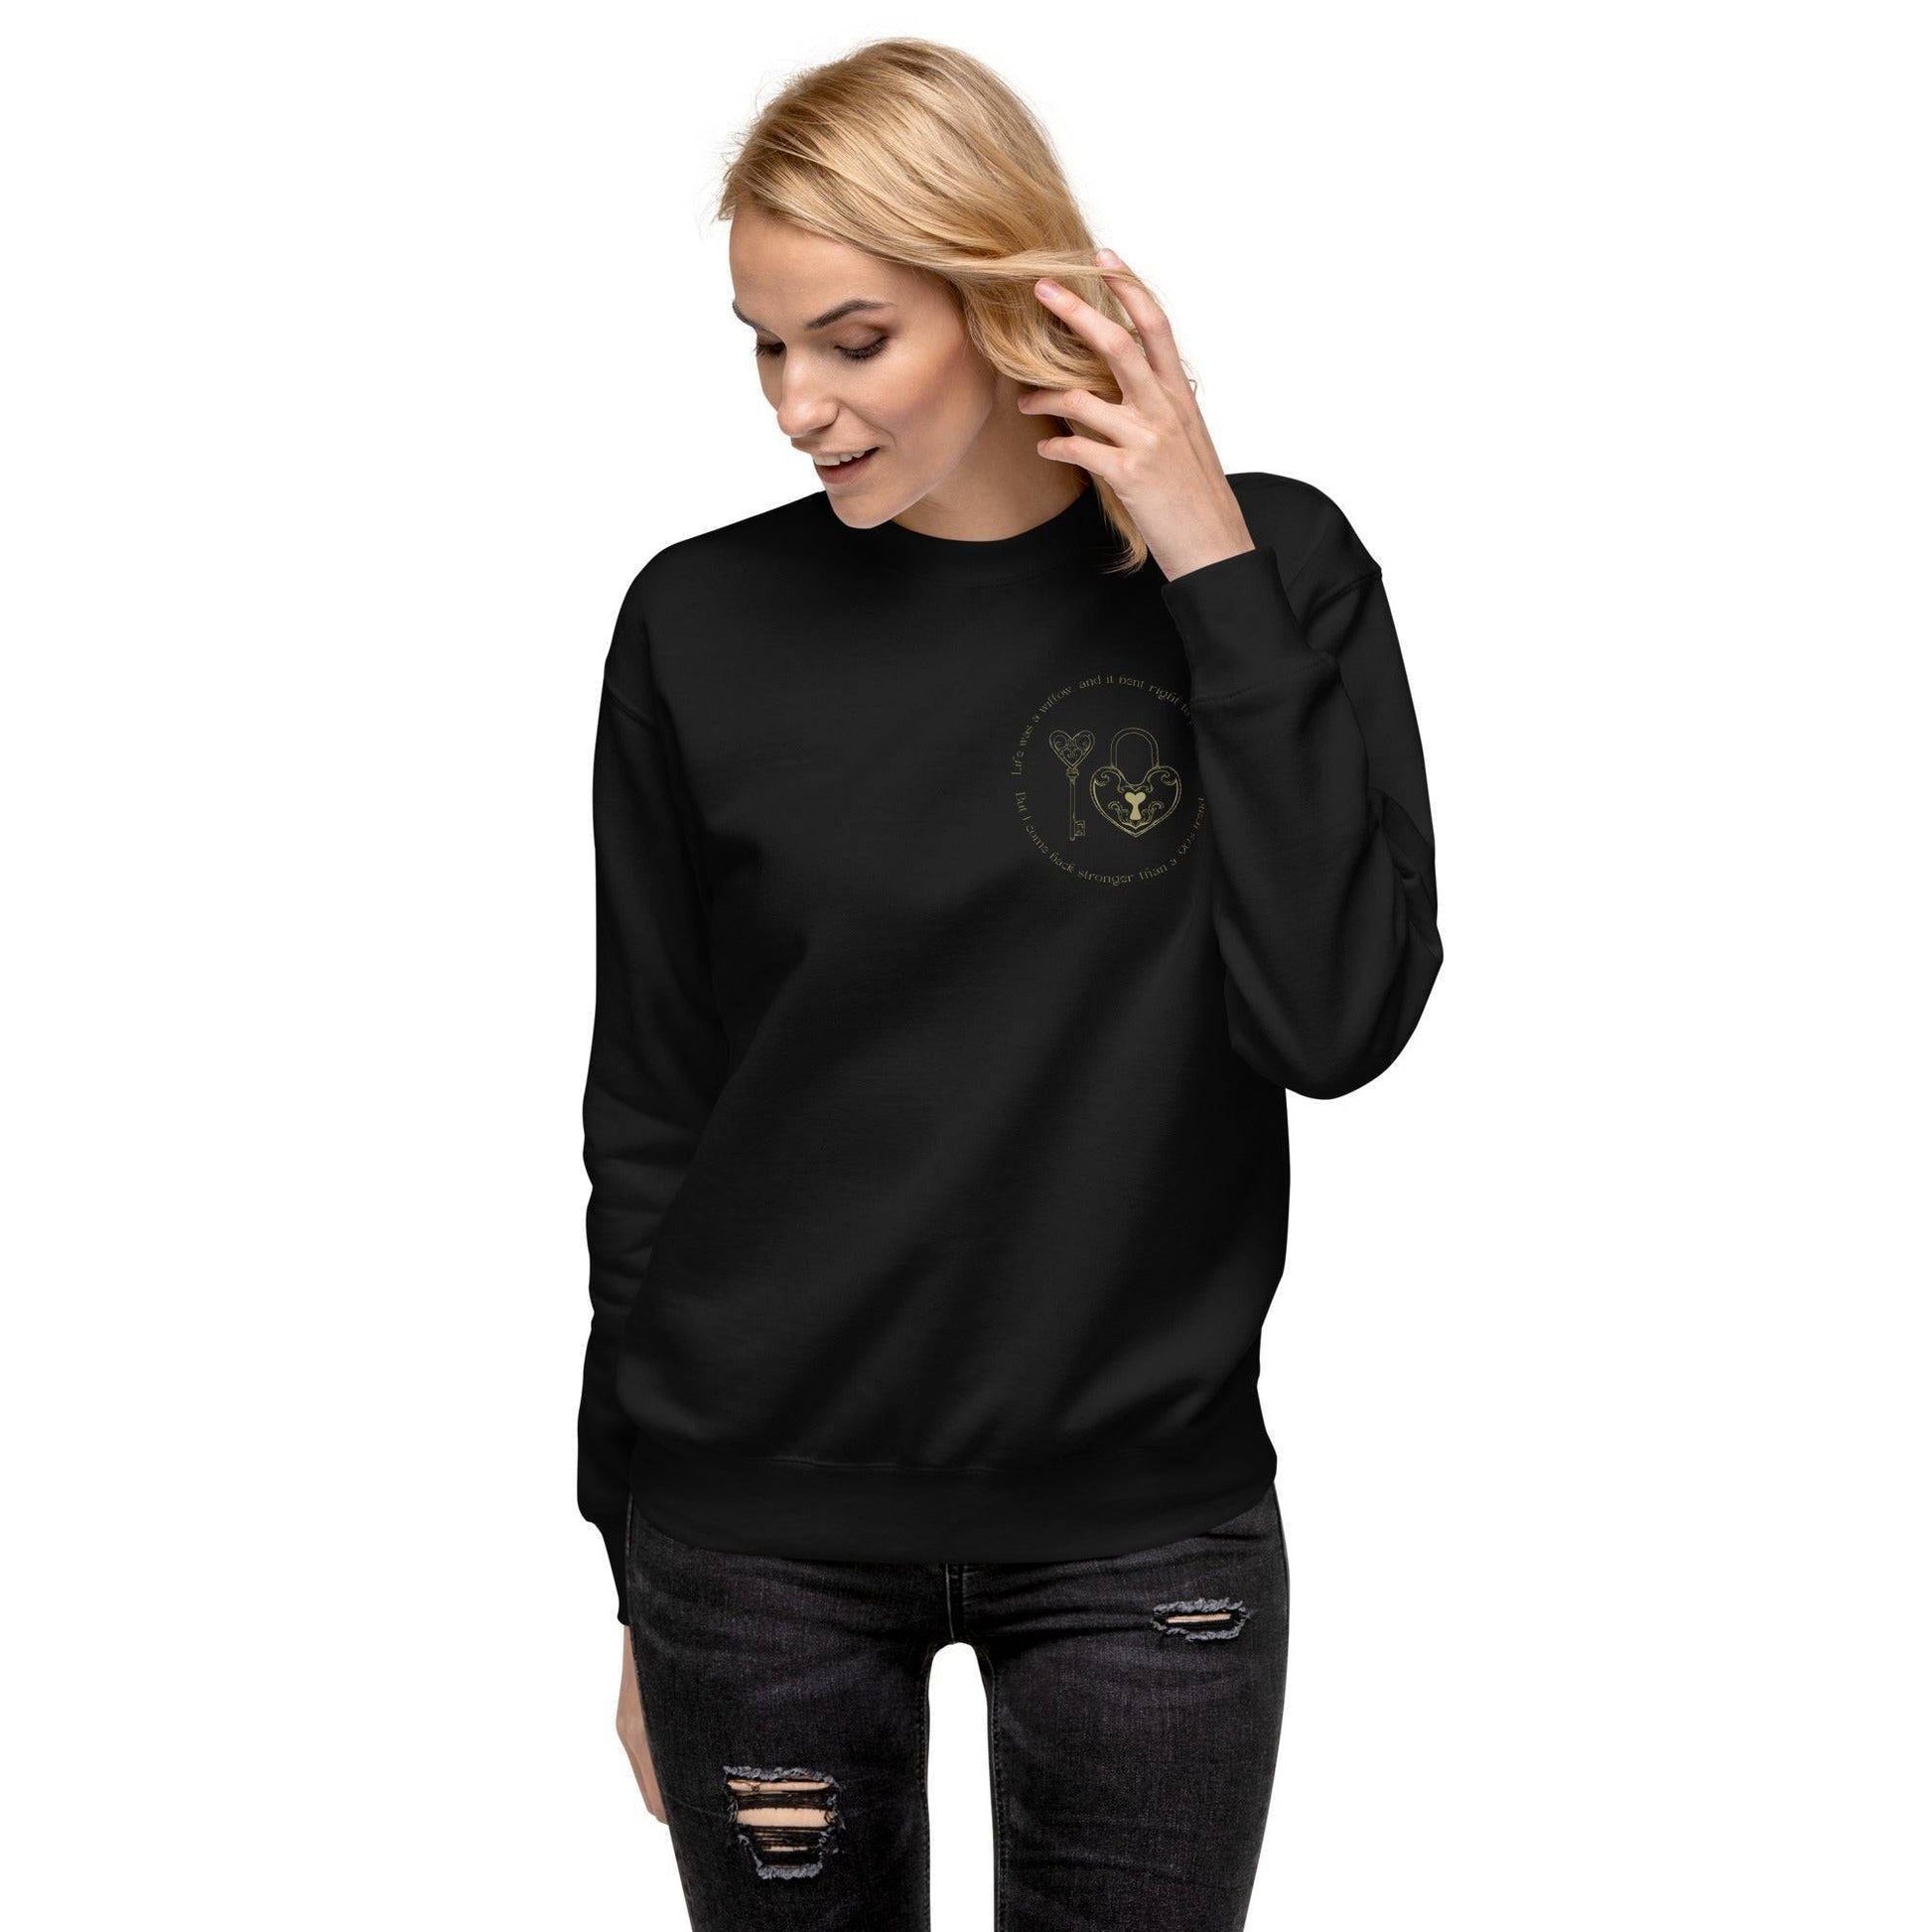 Taylor Swift Willow Embroidered Sweatshirt Black